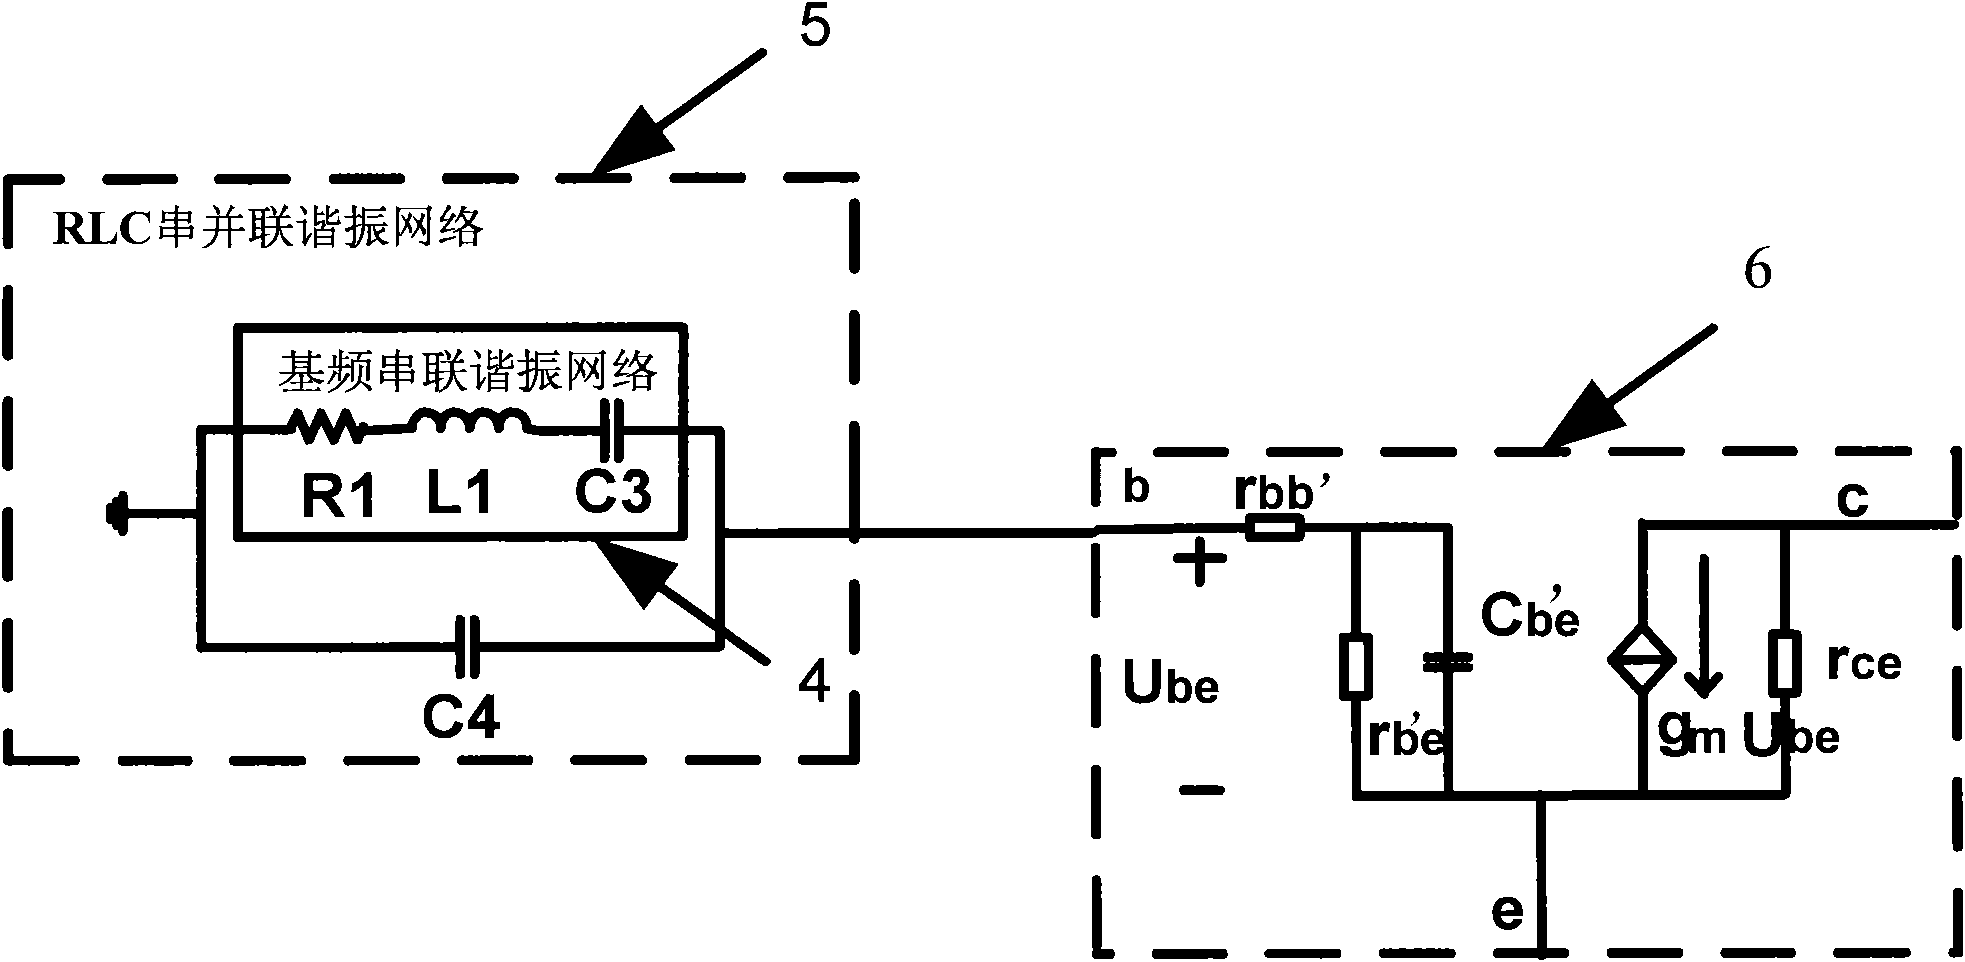 Radio-frequency CASCODE structure power amplifier with improved linearity and power added efficiency